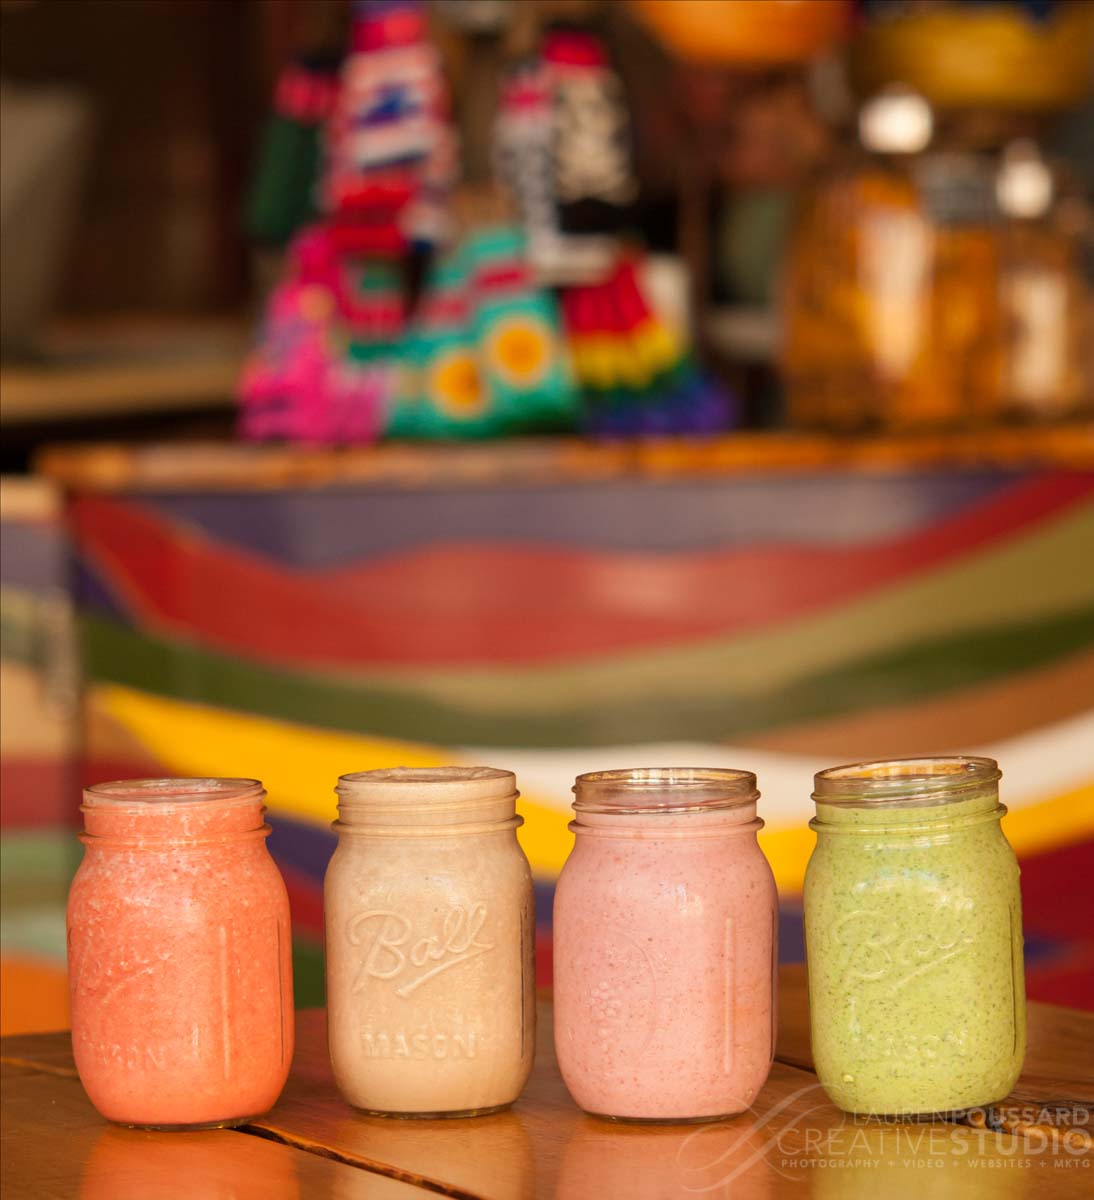 Smoothies by Life Alive by Lauren Poussard Photography